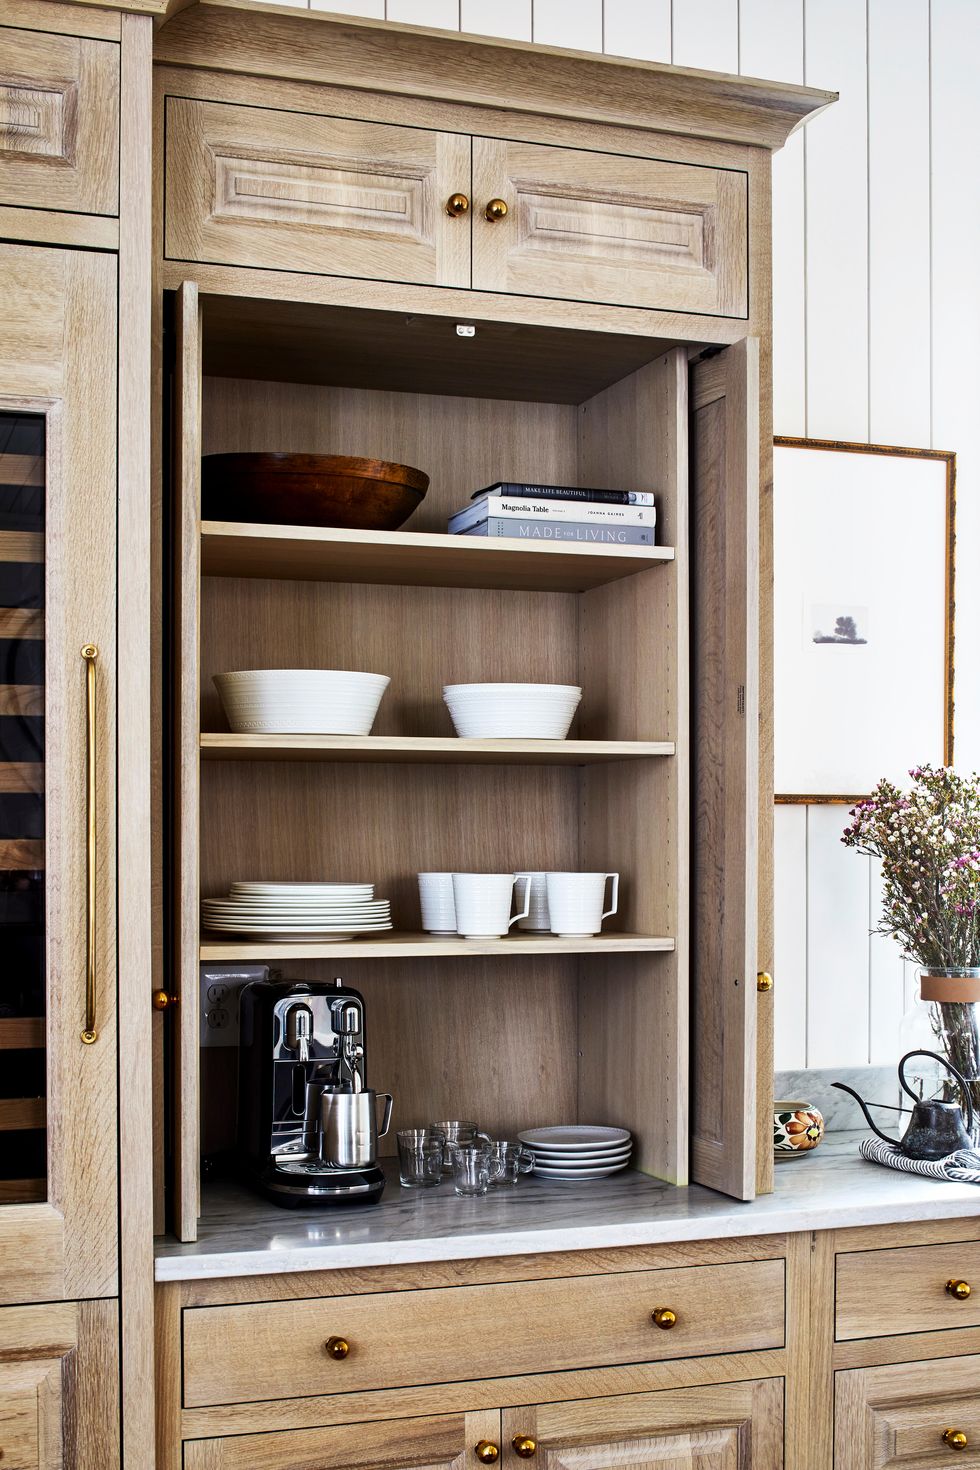 Pocket Cabinet Doors Are The Perfect Open Shelving Solution, 54% OFF